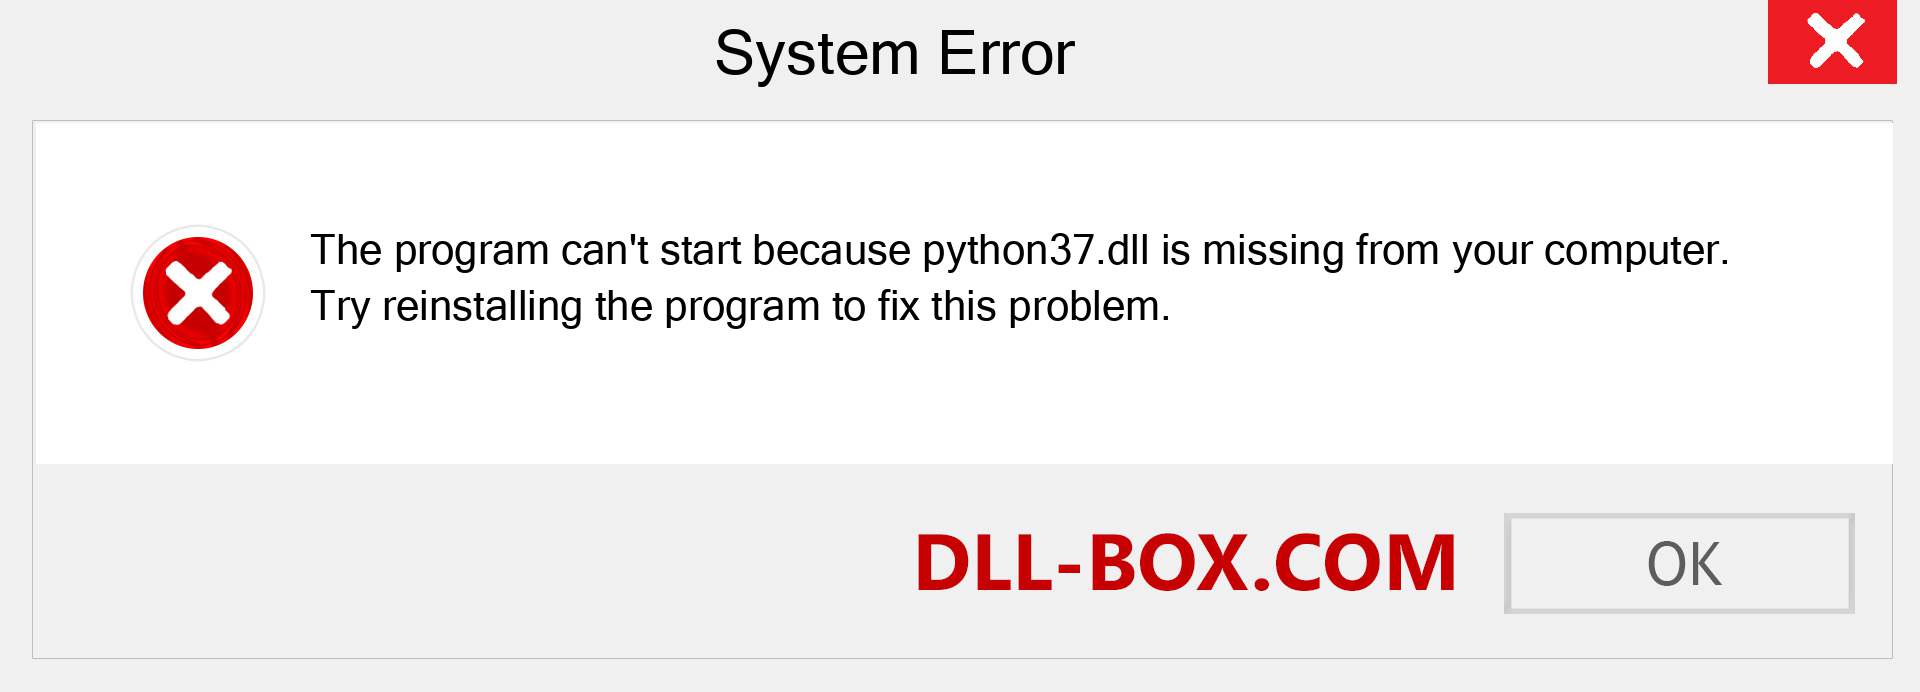  python37.dll file is missing?. Download for Windows 7, 8, 10 - Fix  python37 dll Missing Error on Windows, photos, images